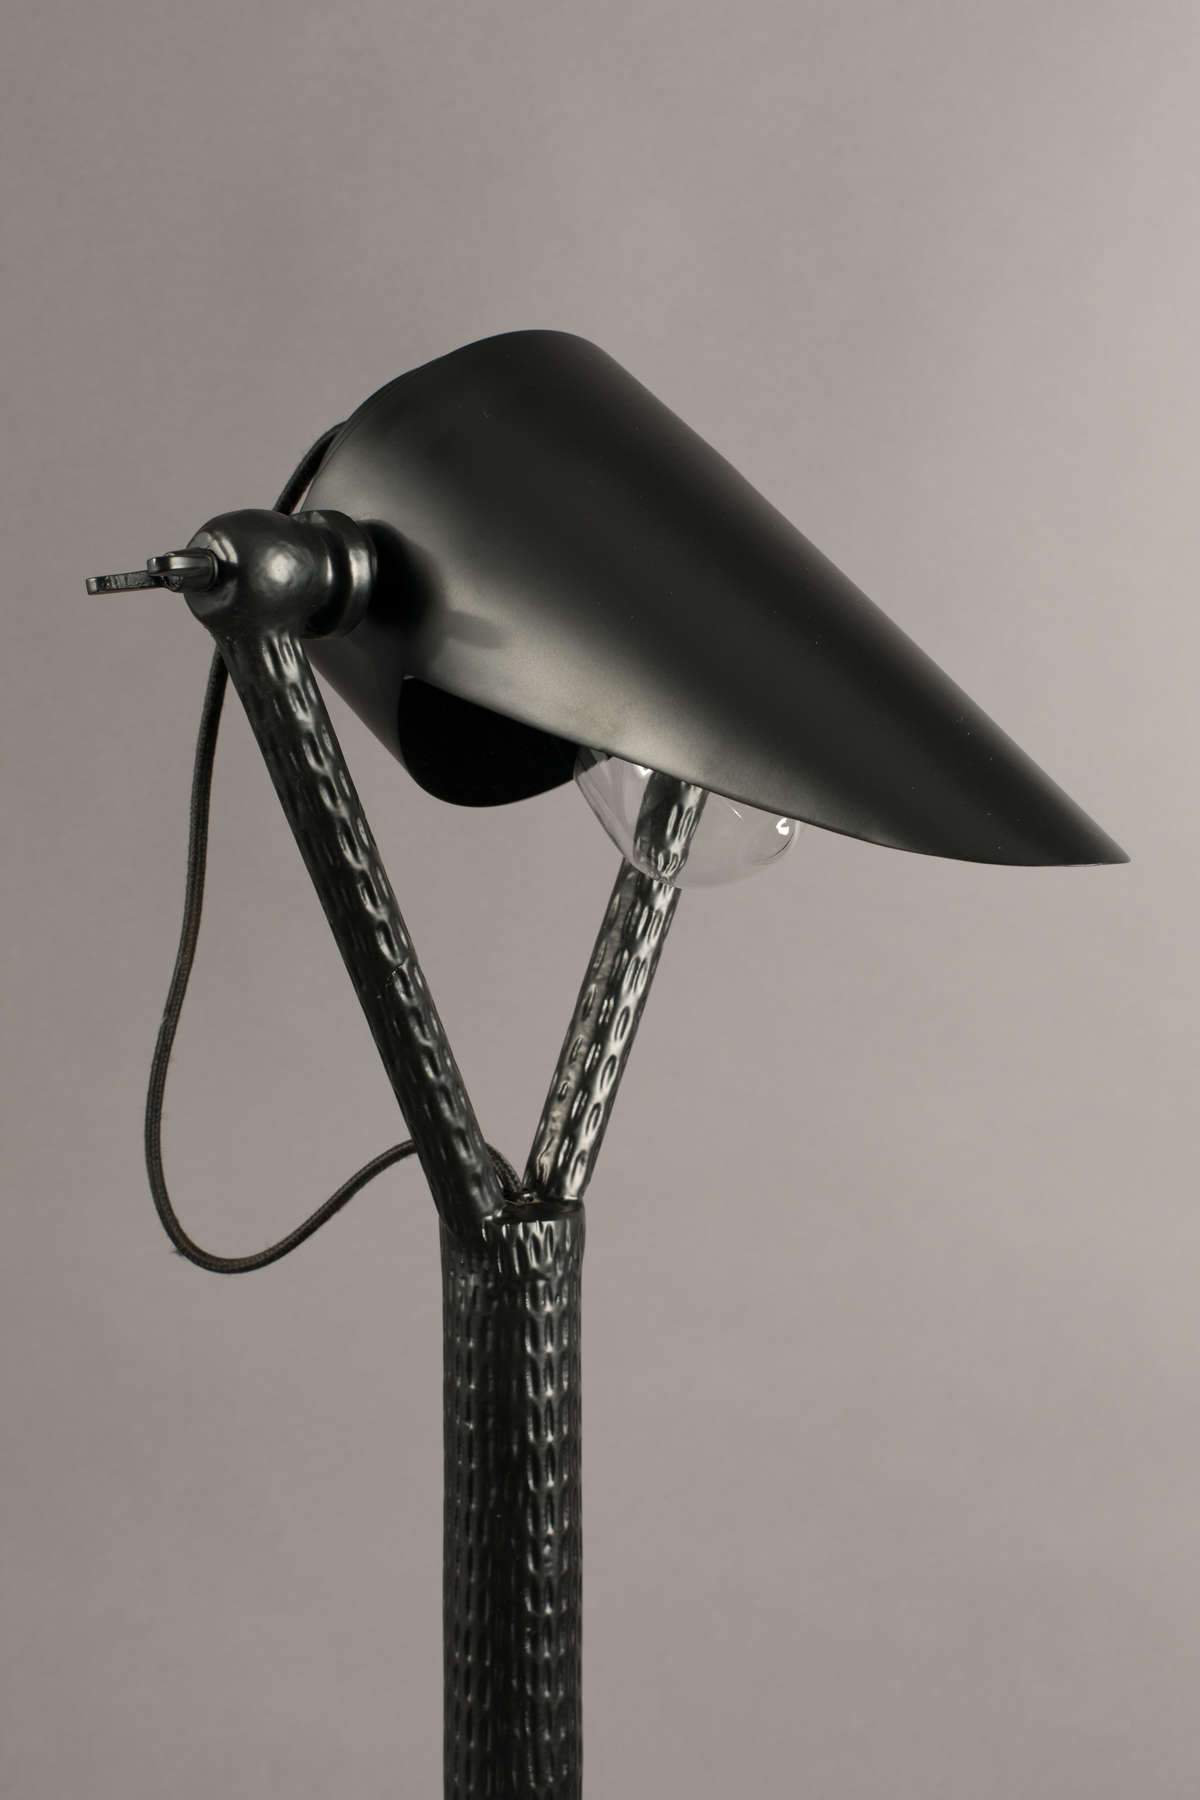 Falcon office lamp will be perfectly on the desk, bedside table or stylish dresser. The conclusion is the basis, which will introduce a note of eclecticism into any interior. Tasteful details that add elegance also pay attention.